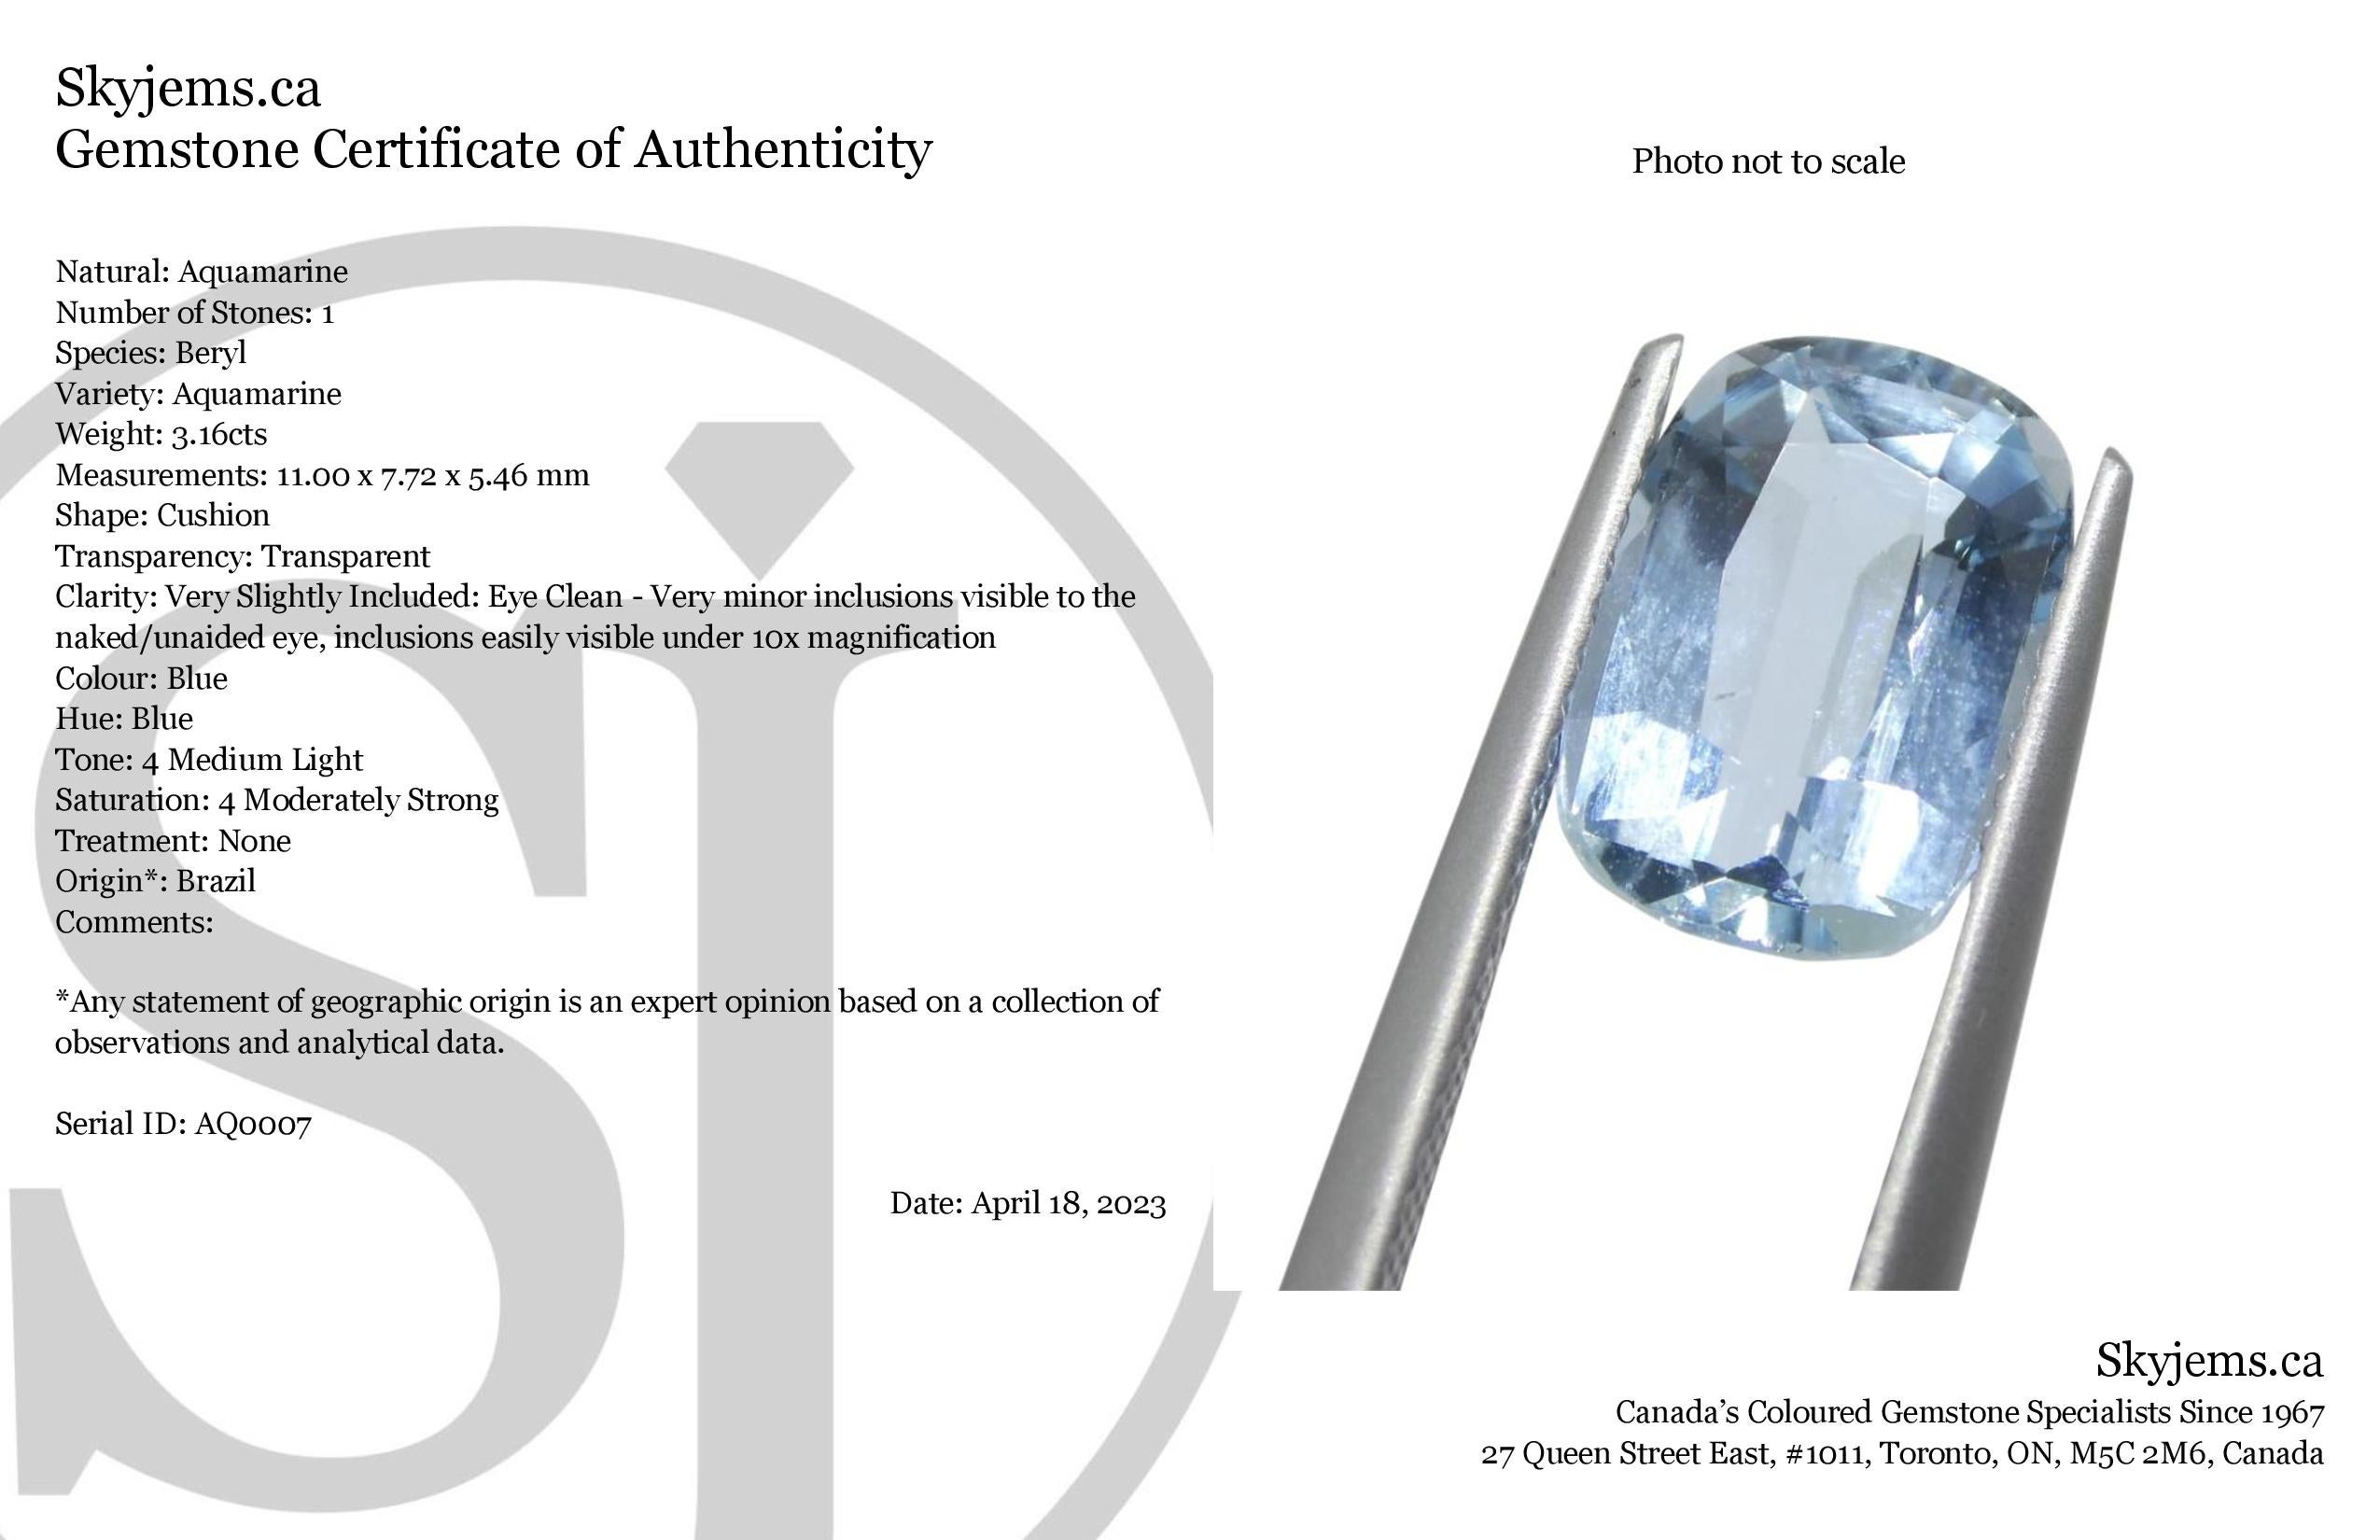 Description:

Gem Type: Aquamarine
Number of Stones: 1
Weight: 3.16 cts
Measurements: 11.00 x 7.72 x 5.46 mm
Shape: Cushion
Cutting Style Crown: Brilliant
Cutting Style Pavilion: Modified Brilliant Cut
Transparency: Transparent
Clarity: Very